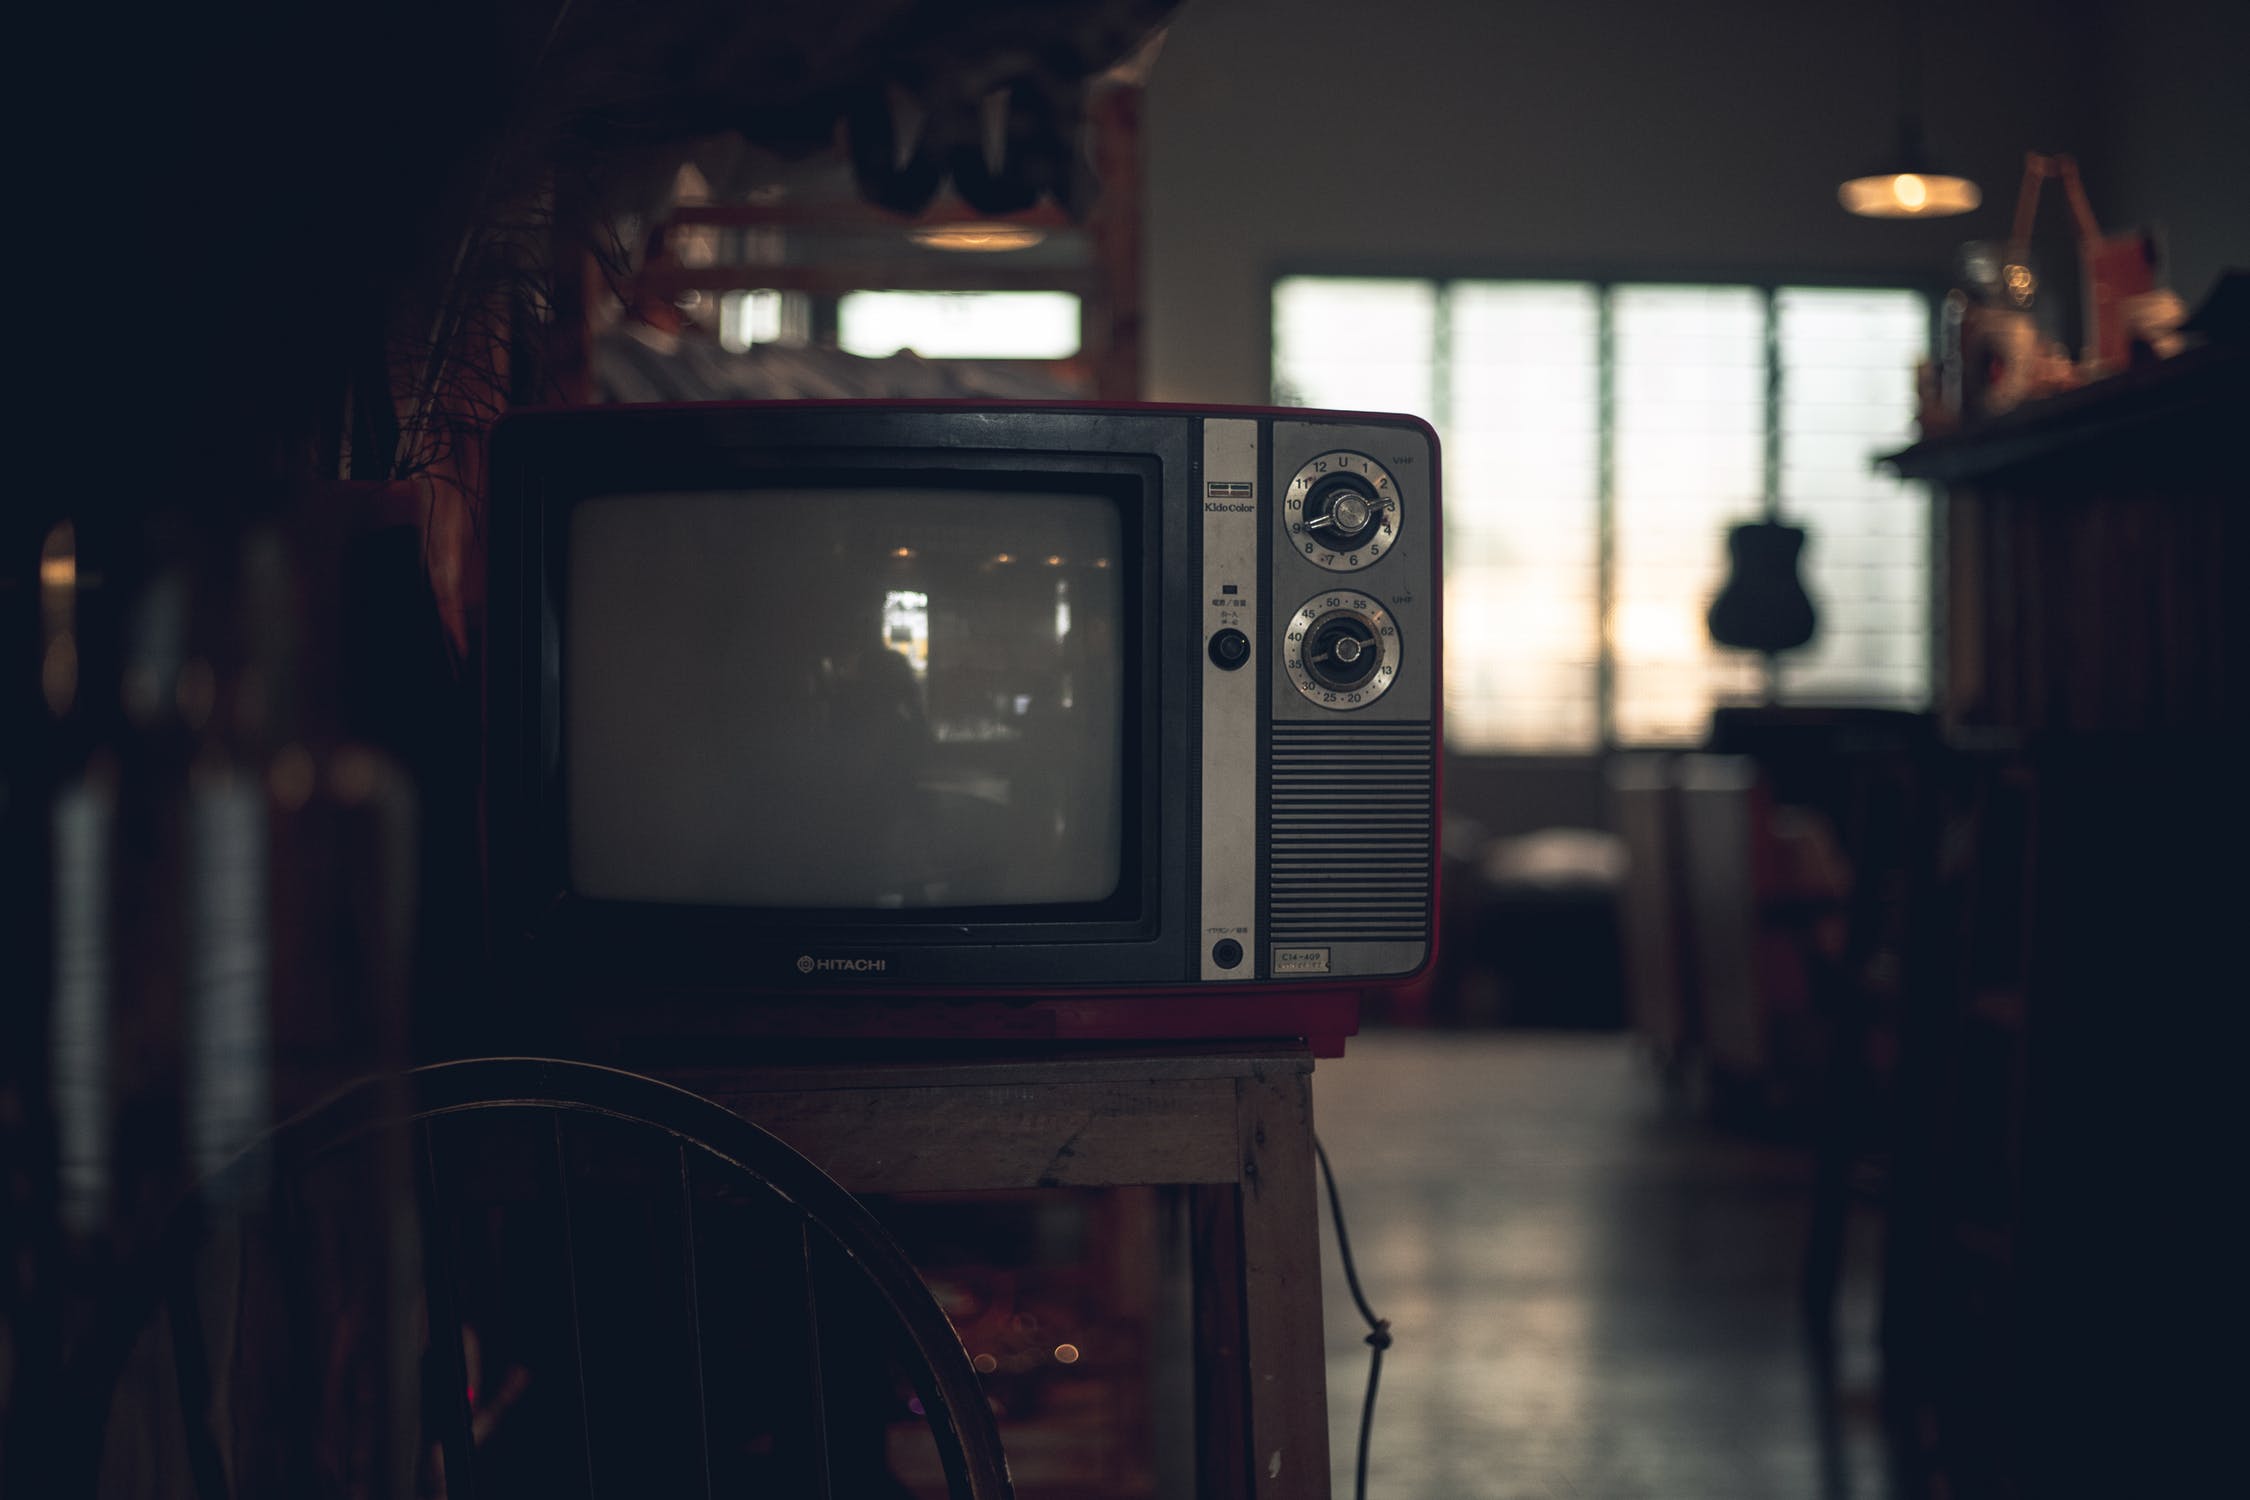 An old school television